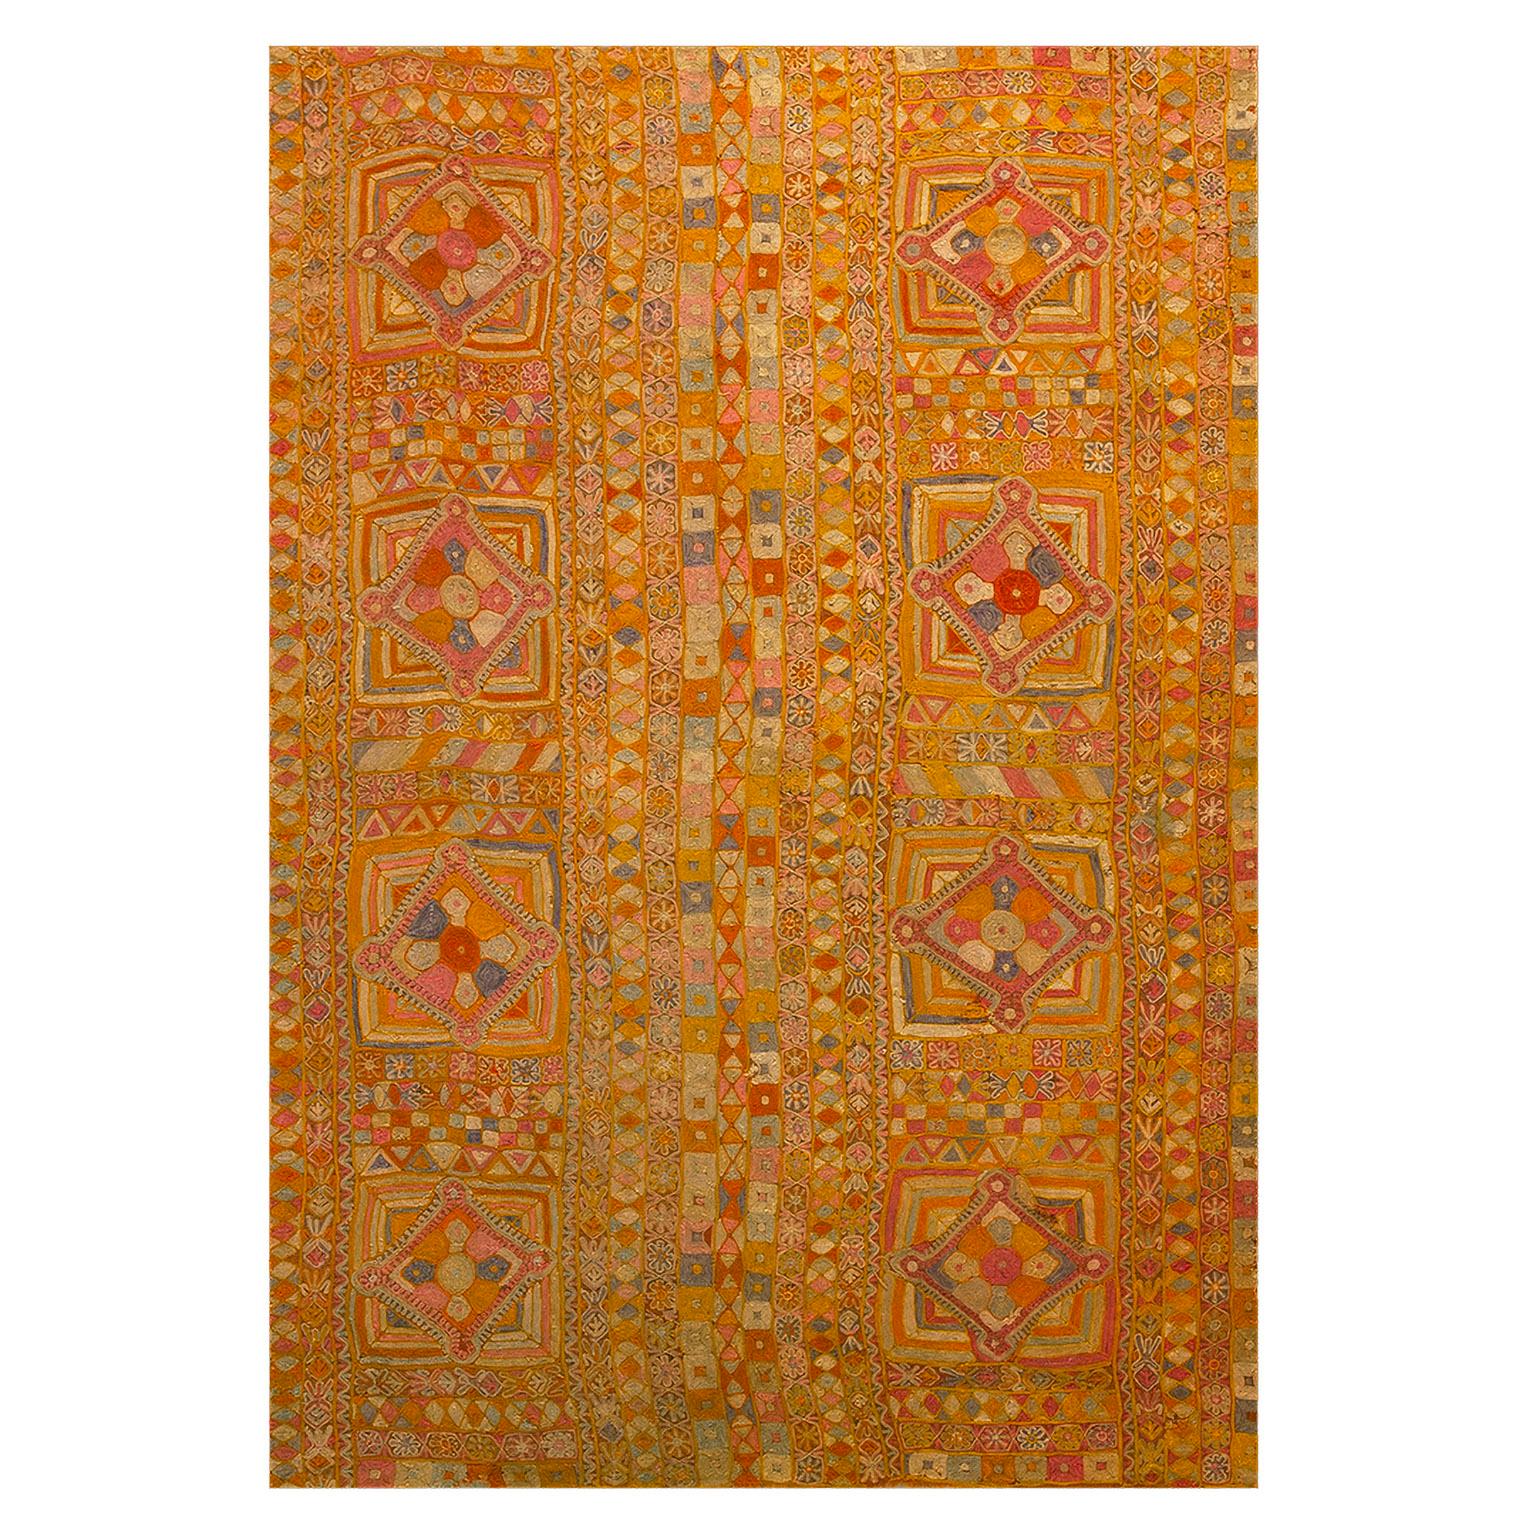 1970s Marsh Arab Embroidery ( 5' 3'' x 8' - 160 x 245 cm ) For Sale